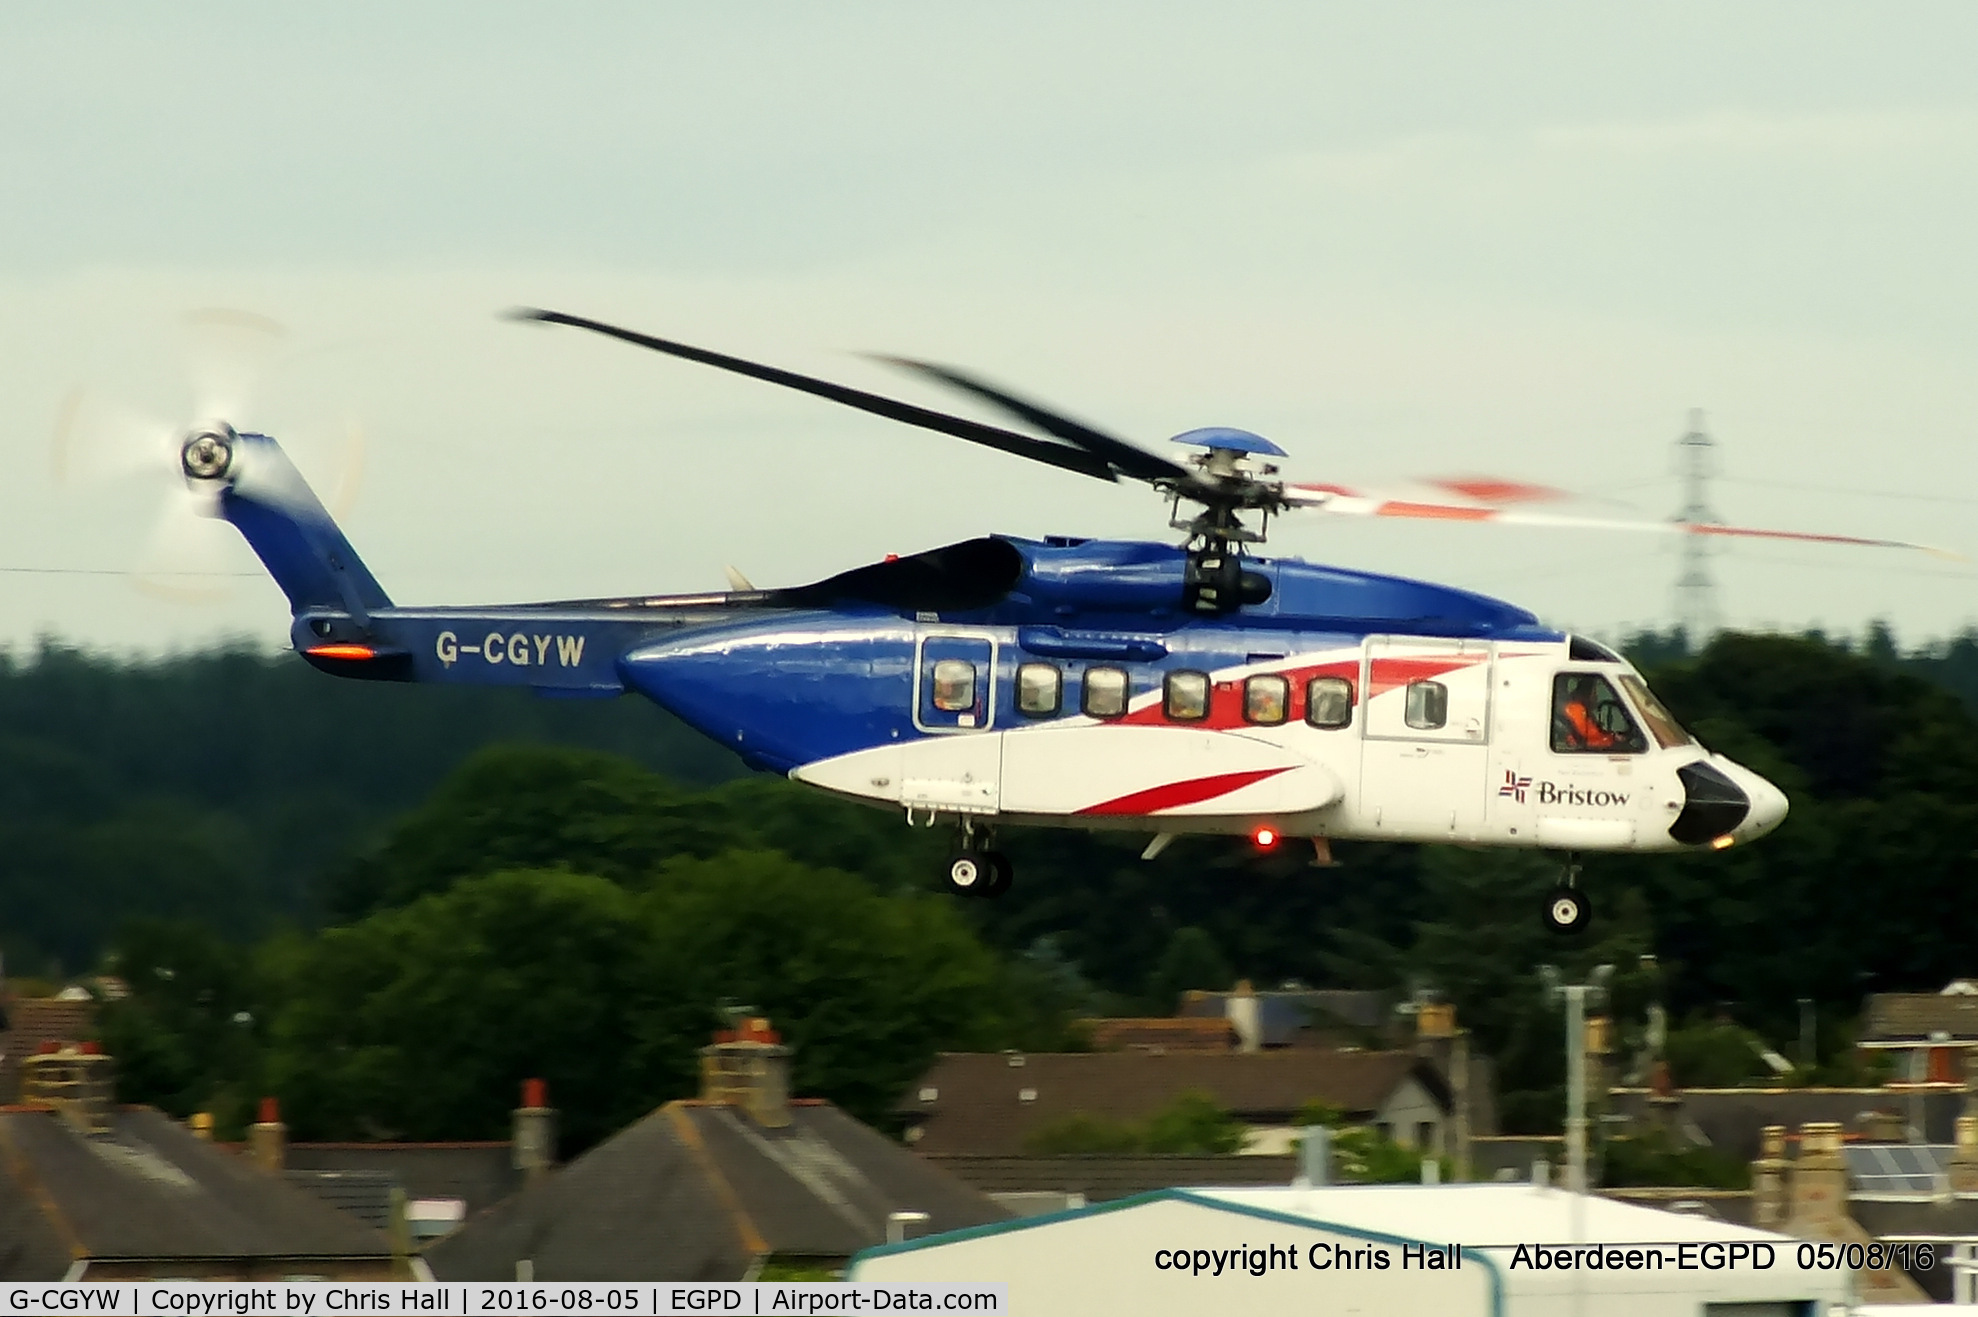 G-CGYW, 2011 Sikorsky S-92A C/N 920157, Bristow Helicopters